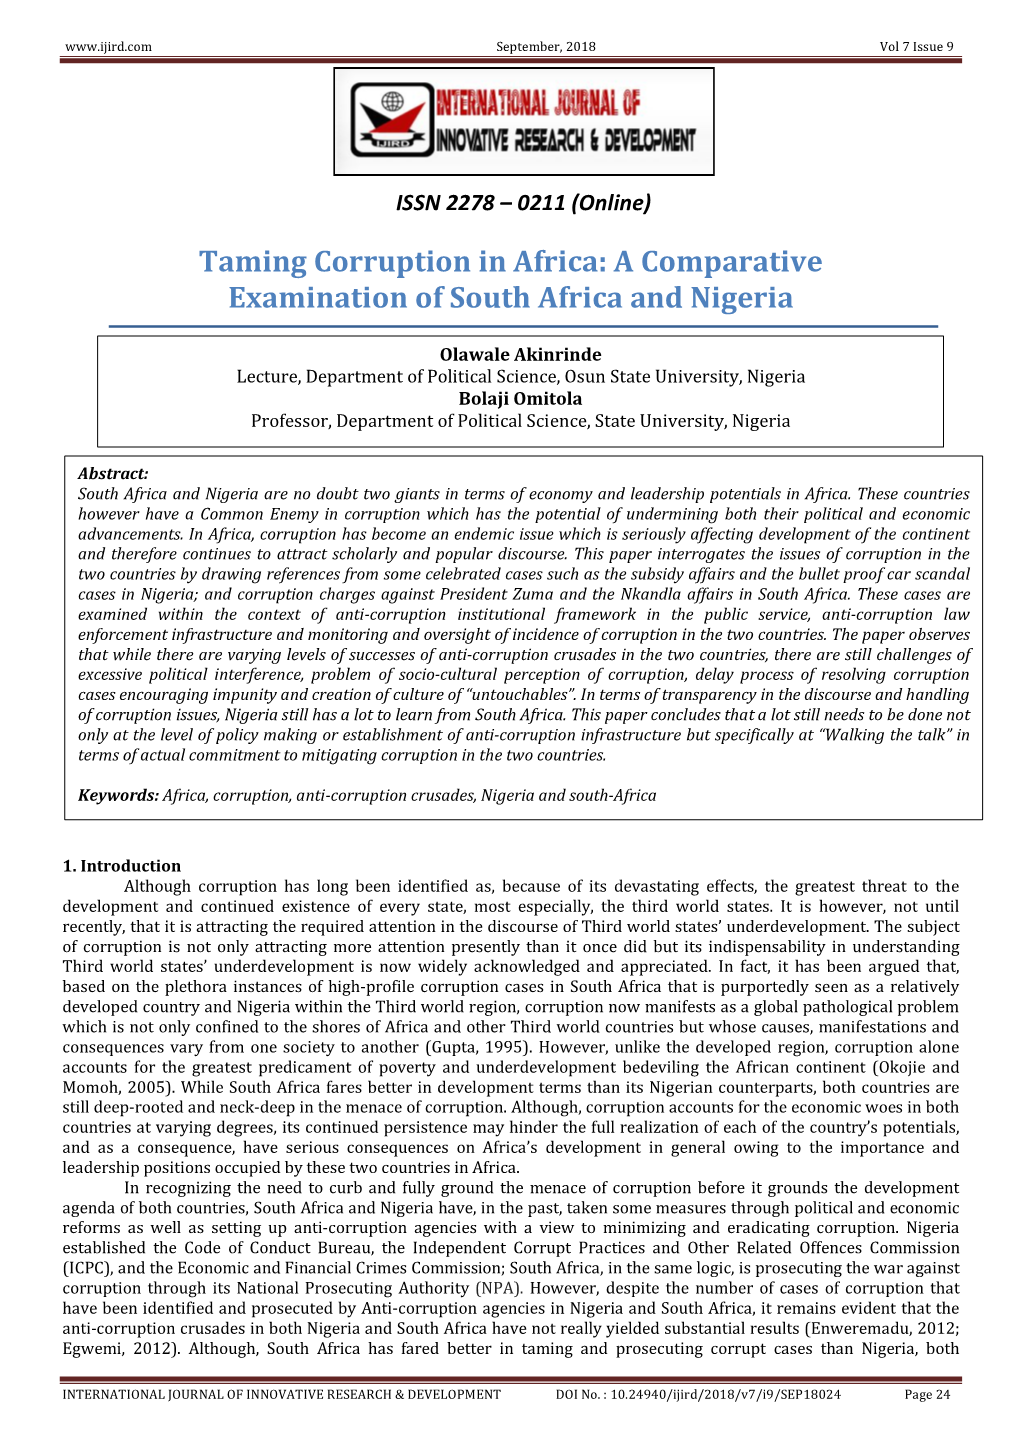 Taming Corruption in Africa: a Comparative Examination of South Africa and Nigeria